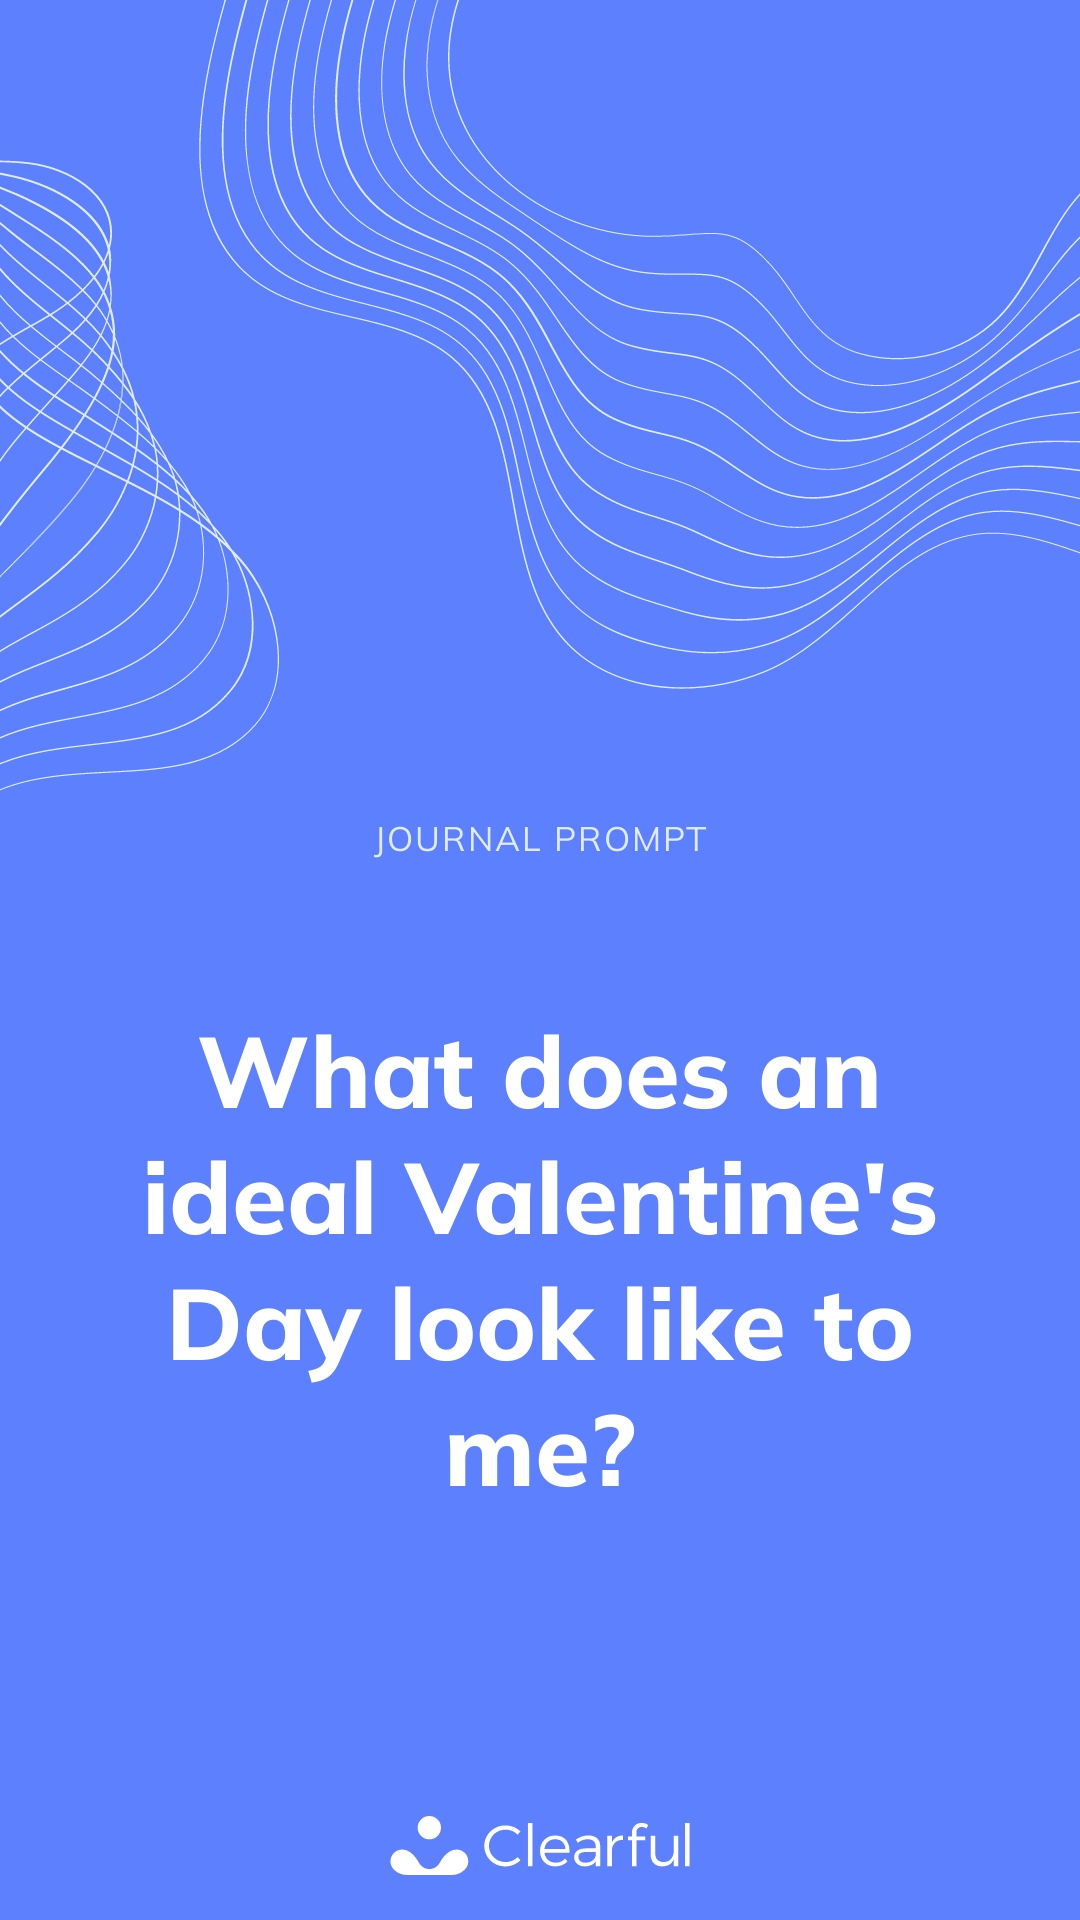 Journal Prompts for Relationships